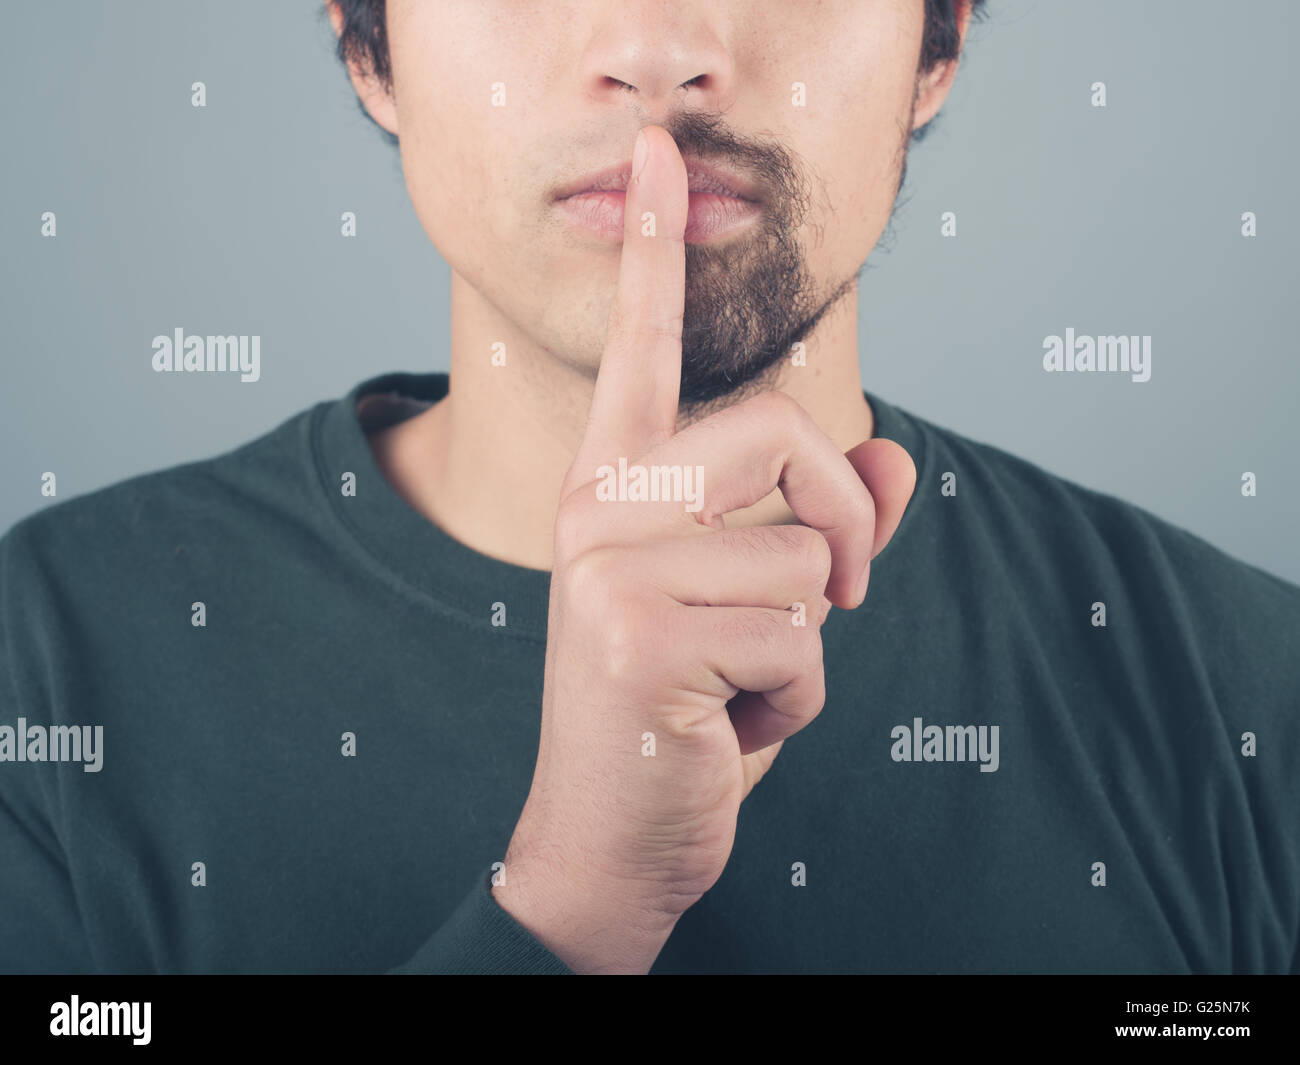 A man with a half shaved beard has his finger on his lips Stock Photo